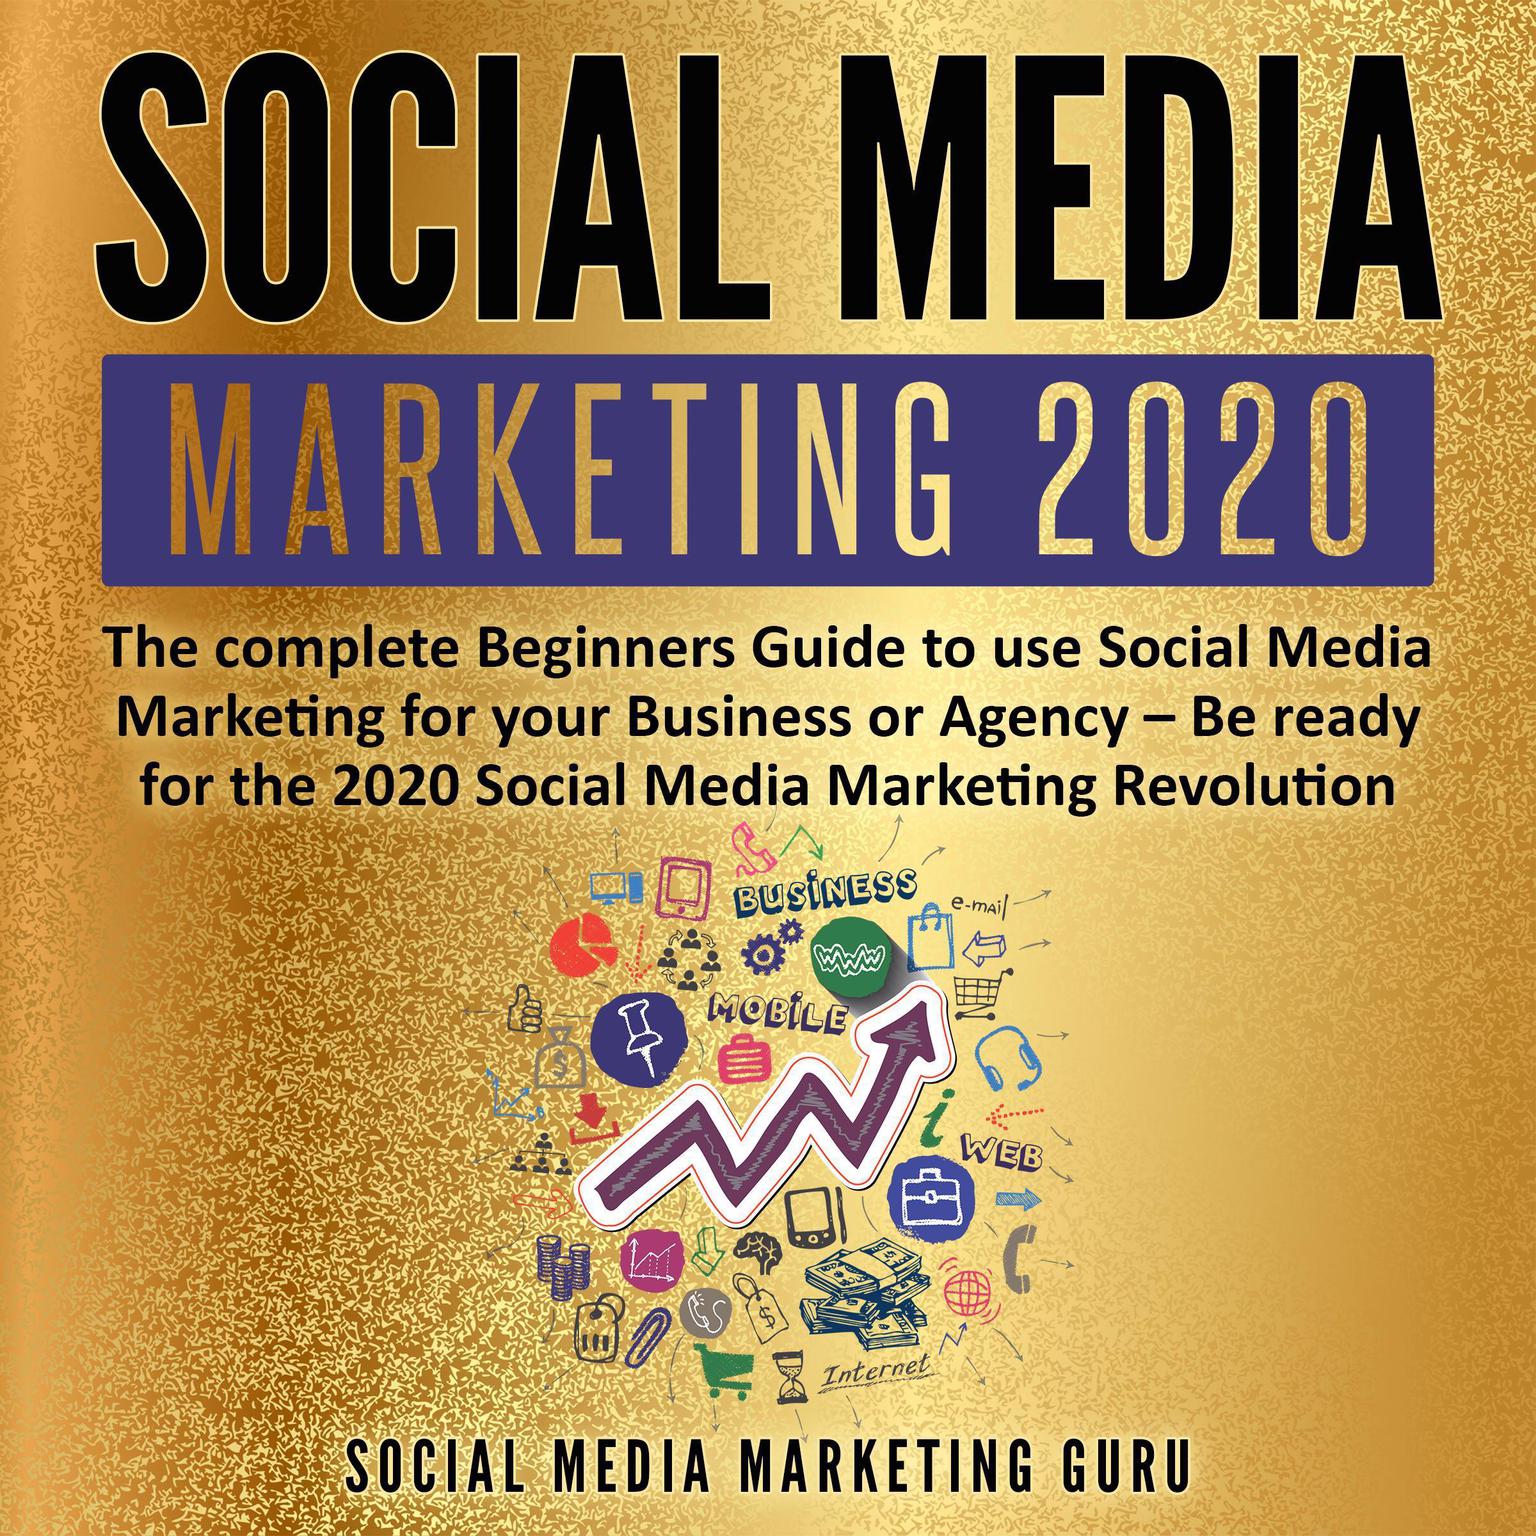 Social Media Marketing 2020 (Abridged): The Complete Beginners Guide to Use Social Media Marketing for Your Business or Agency—Be Ready for the 2020 Social Media Marketing Revolution Audiobook, by Social Media Marketing Guru